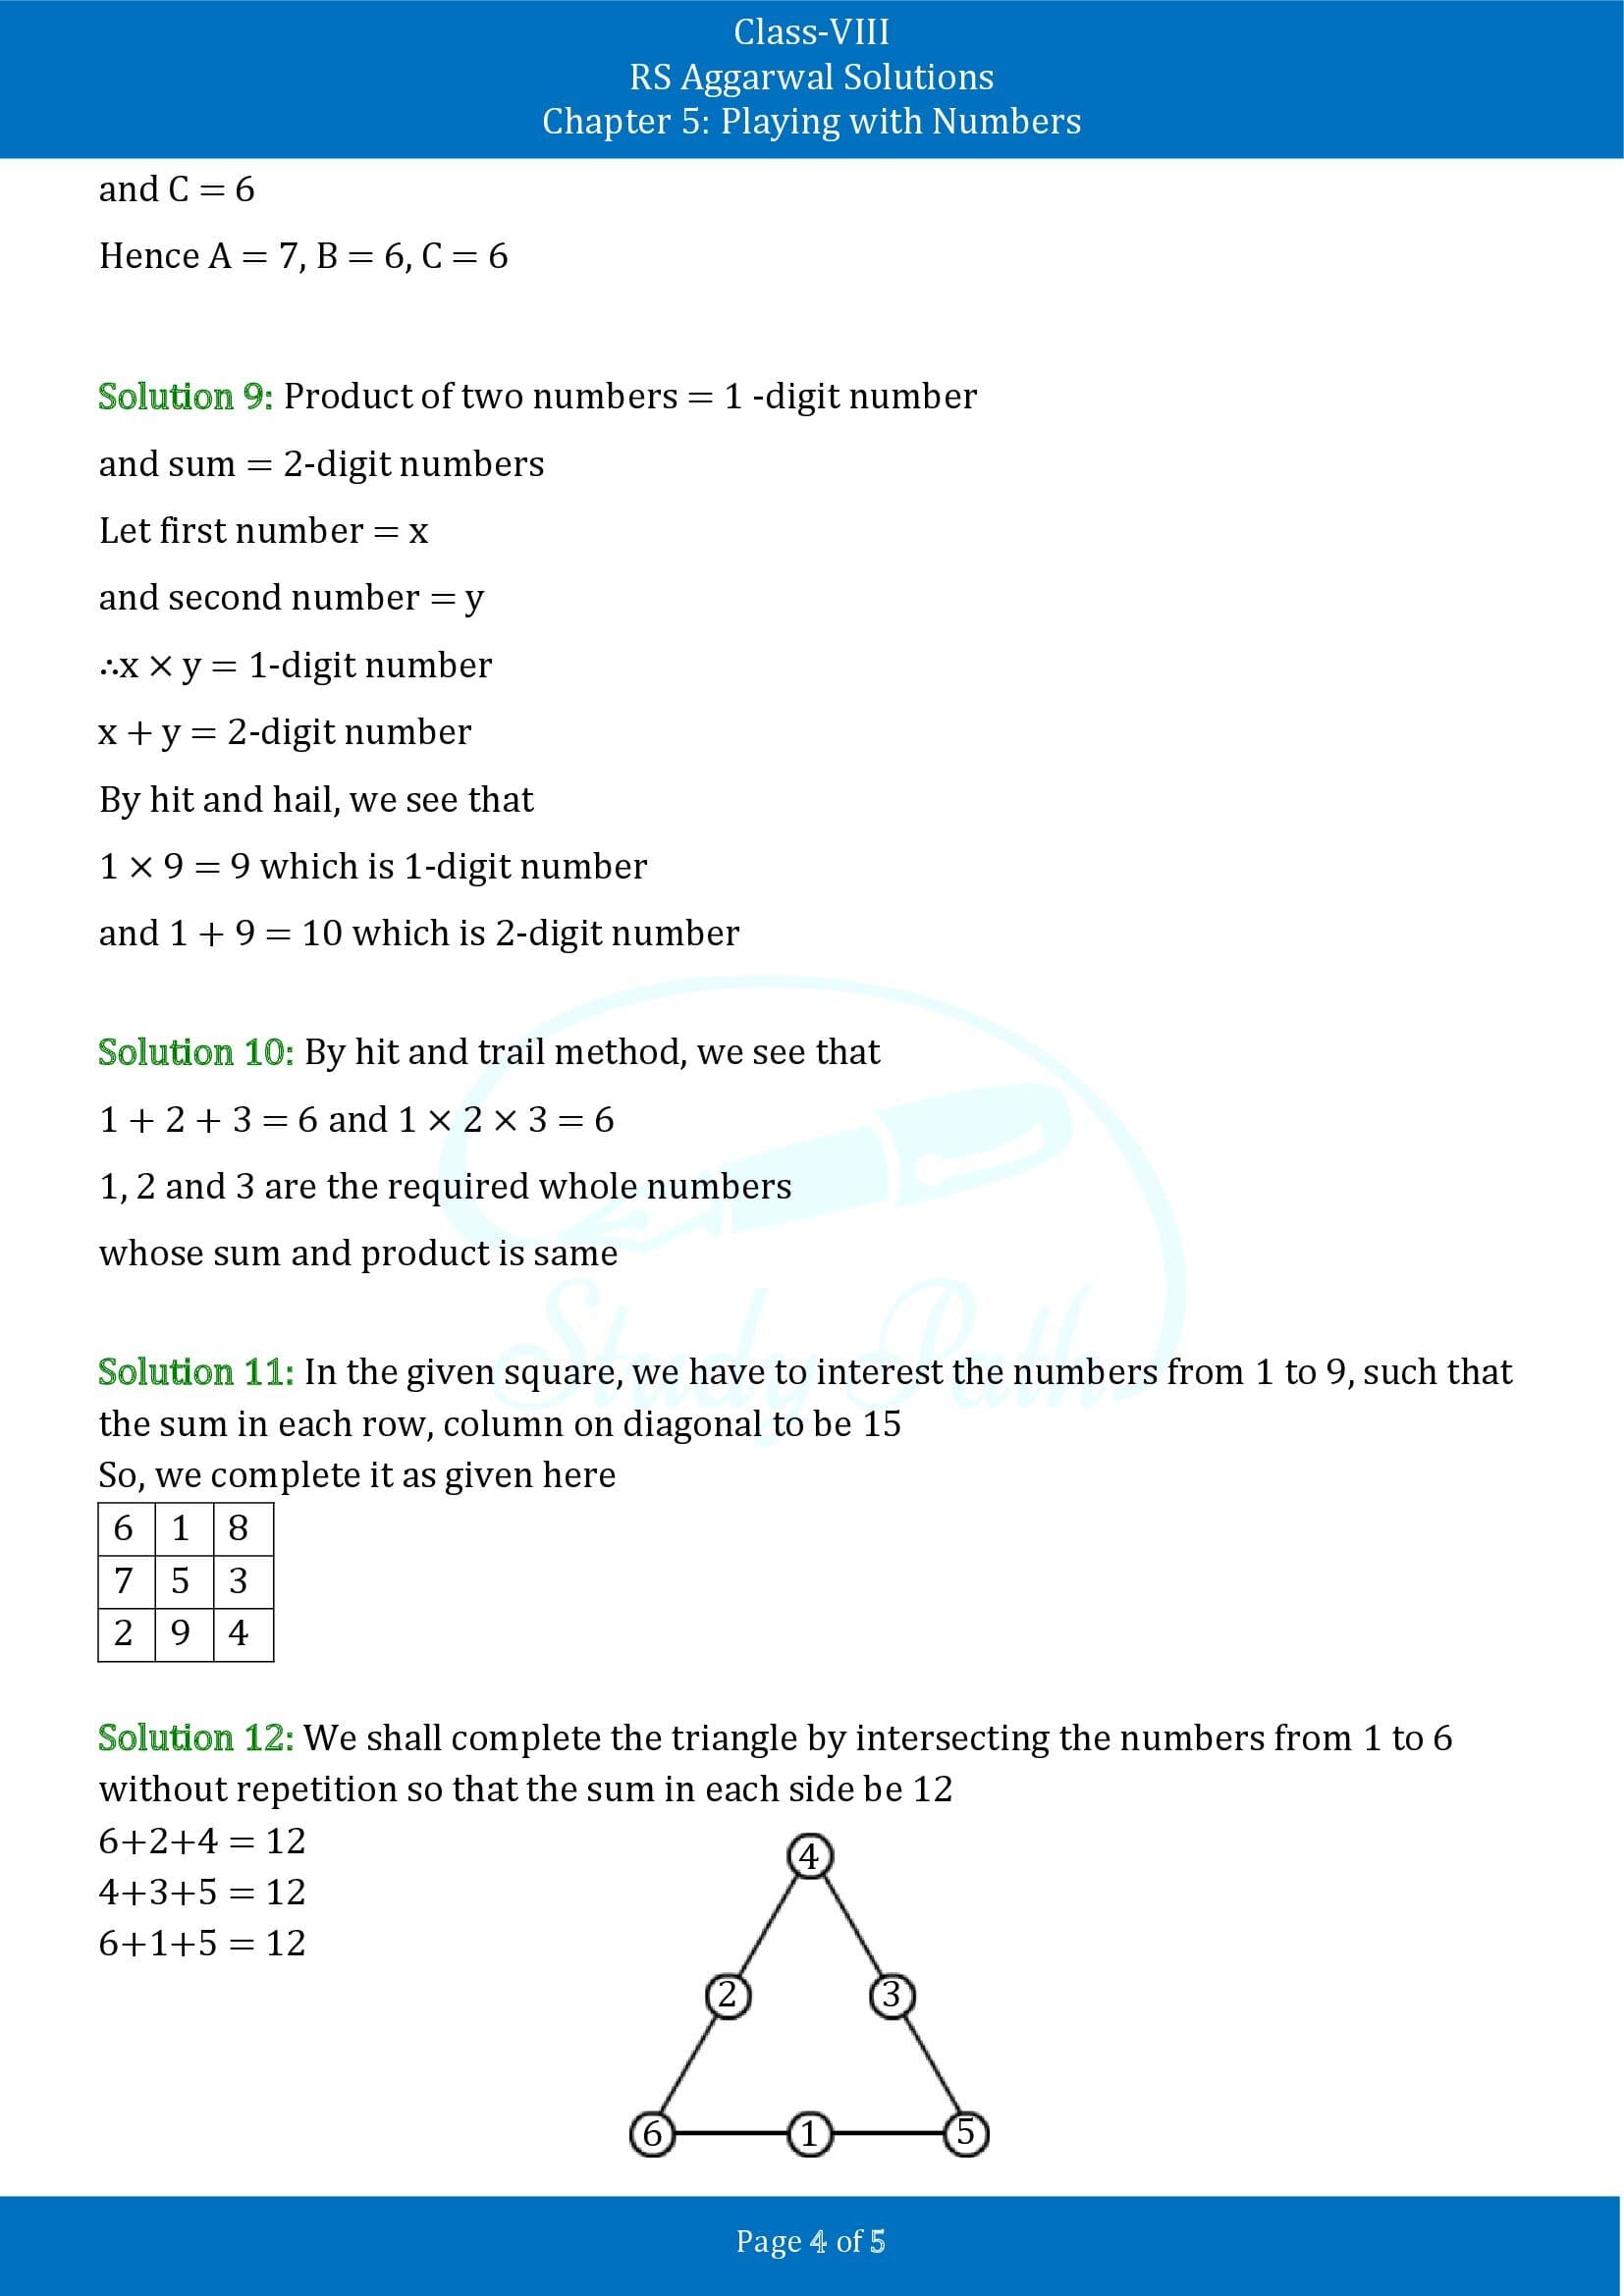 RS Aggarwal Solutions Class 8 Chapter 5 Playing with Numbers Exercise 5C 00004